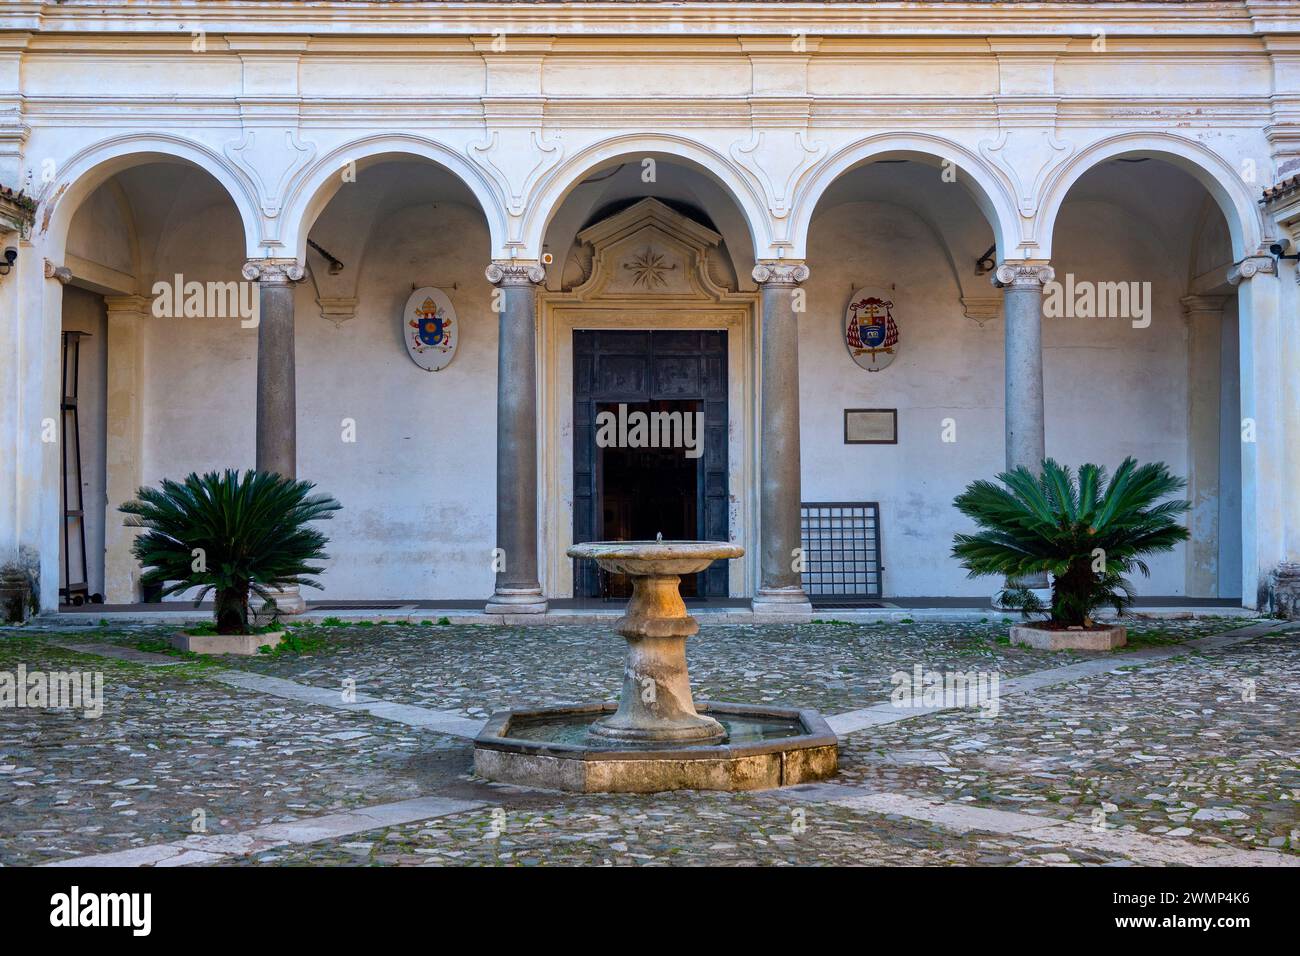 Cloister of the second basilica of San Clemente al Laterano, Rome, Italy Stock Photo